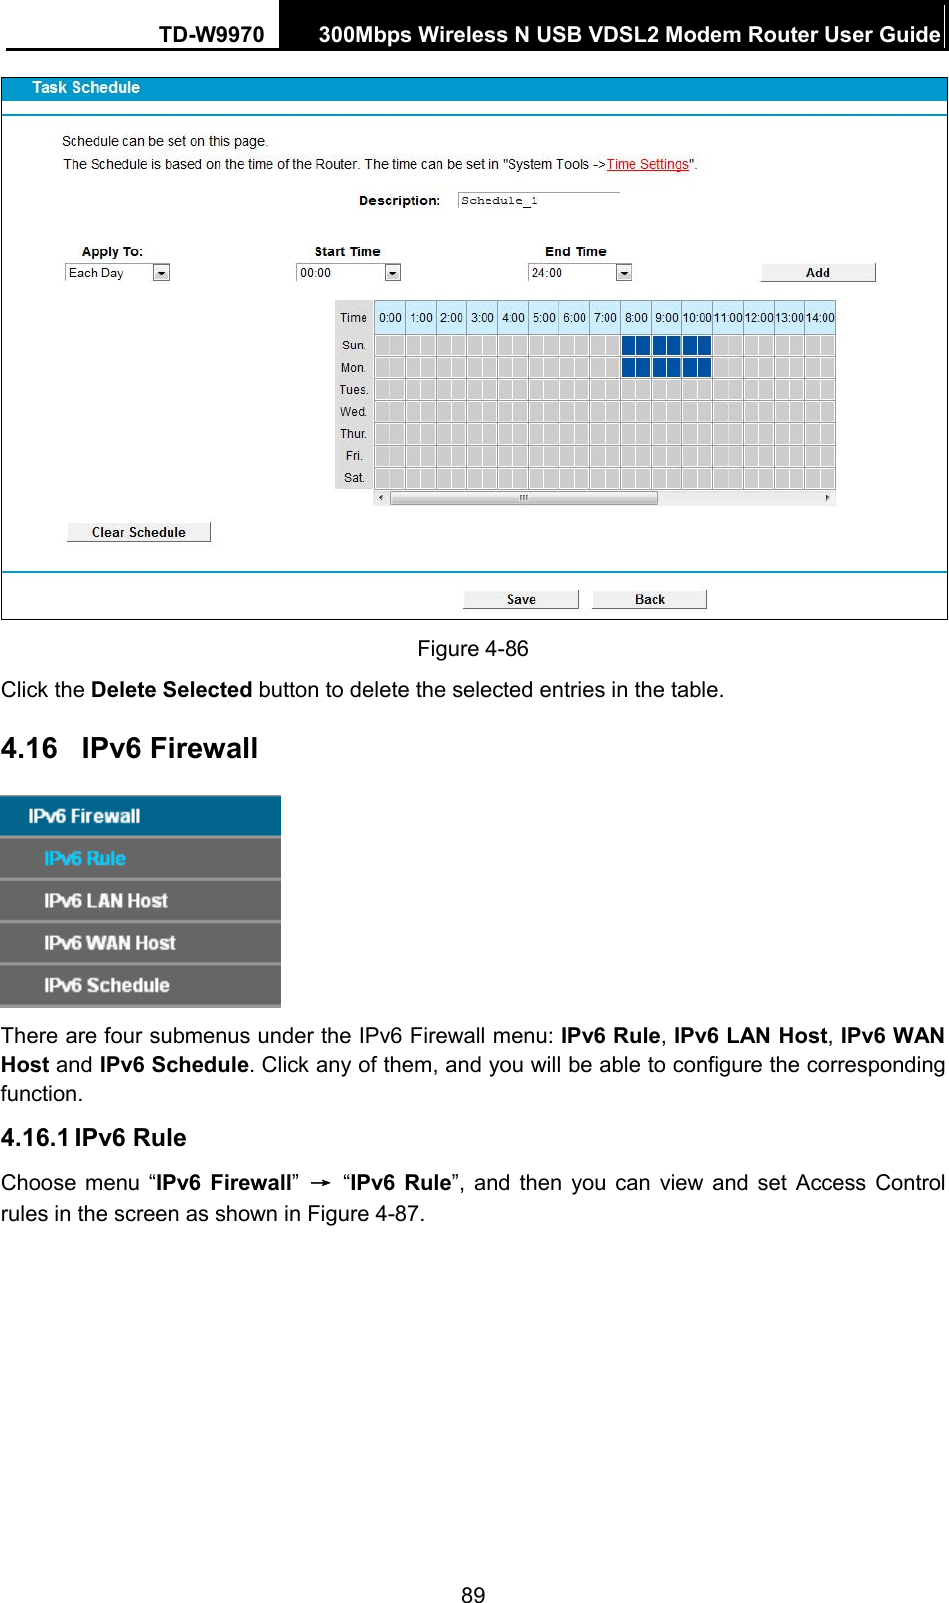 TD-W9970 300Mbps Wireless N USB VDSL2 Modem Router User Guide   Figure 4-86 Click the Delete Selected button to delete the selected entries in the table. 4.16 IPv6 Firewall  There are four submenus under the IPv6 Firewall menu: IPv6 Rule, IPv6 LAN Host, IPv6 WAN Host and IPv6 Schedule. Click any of them, and you will be able to configure the corresponding function. 4.16.1 IPv6 Rule Choose menu “IPv6  Firewall” → “IPv6 Rule”,  and then you can view and set Access Control rules in the screen as shown in Figure 4-87. 89 